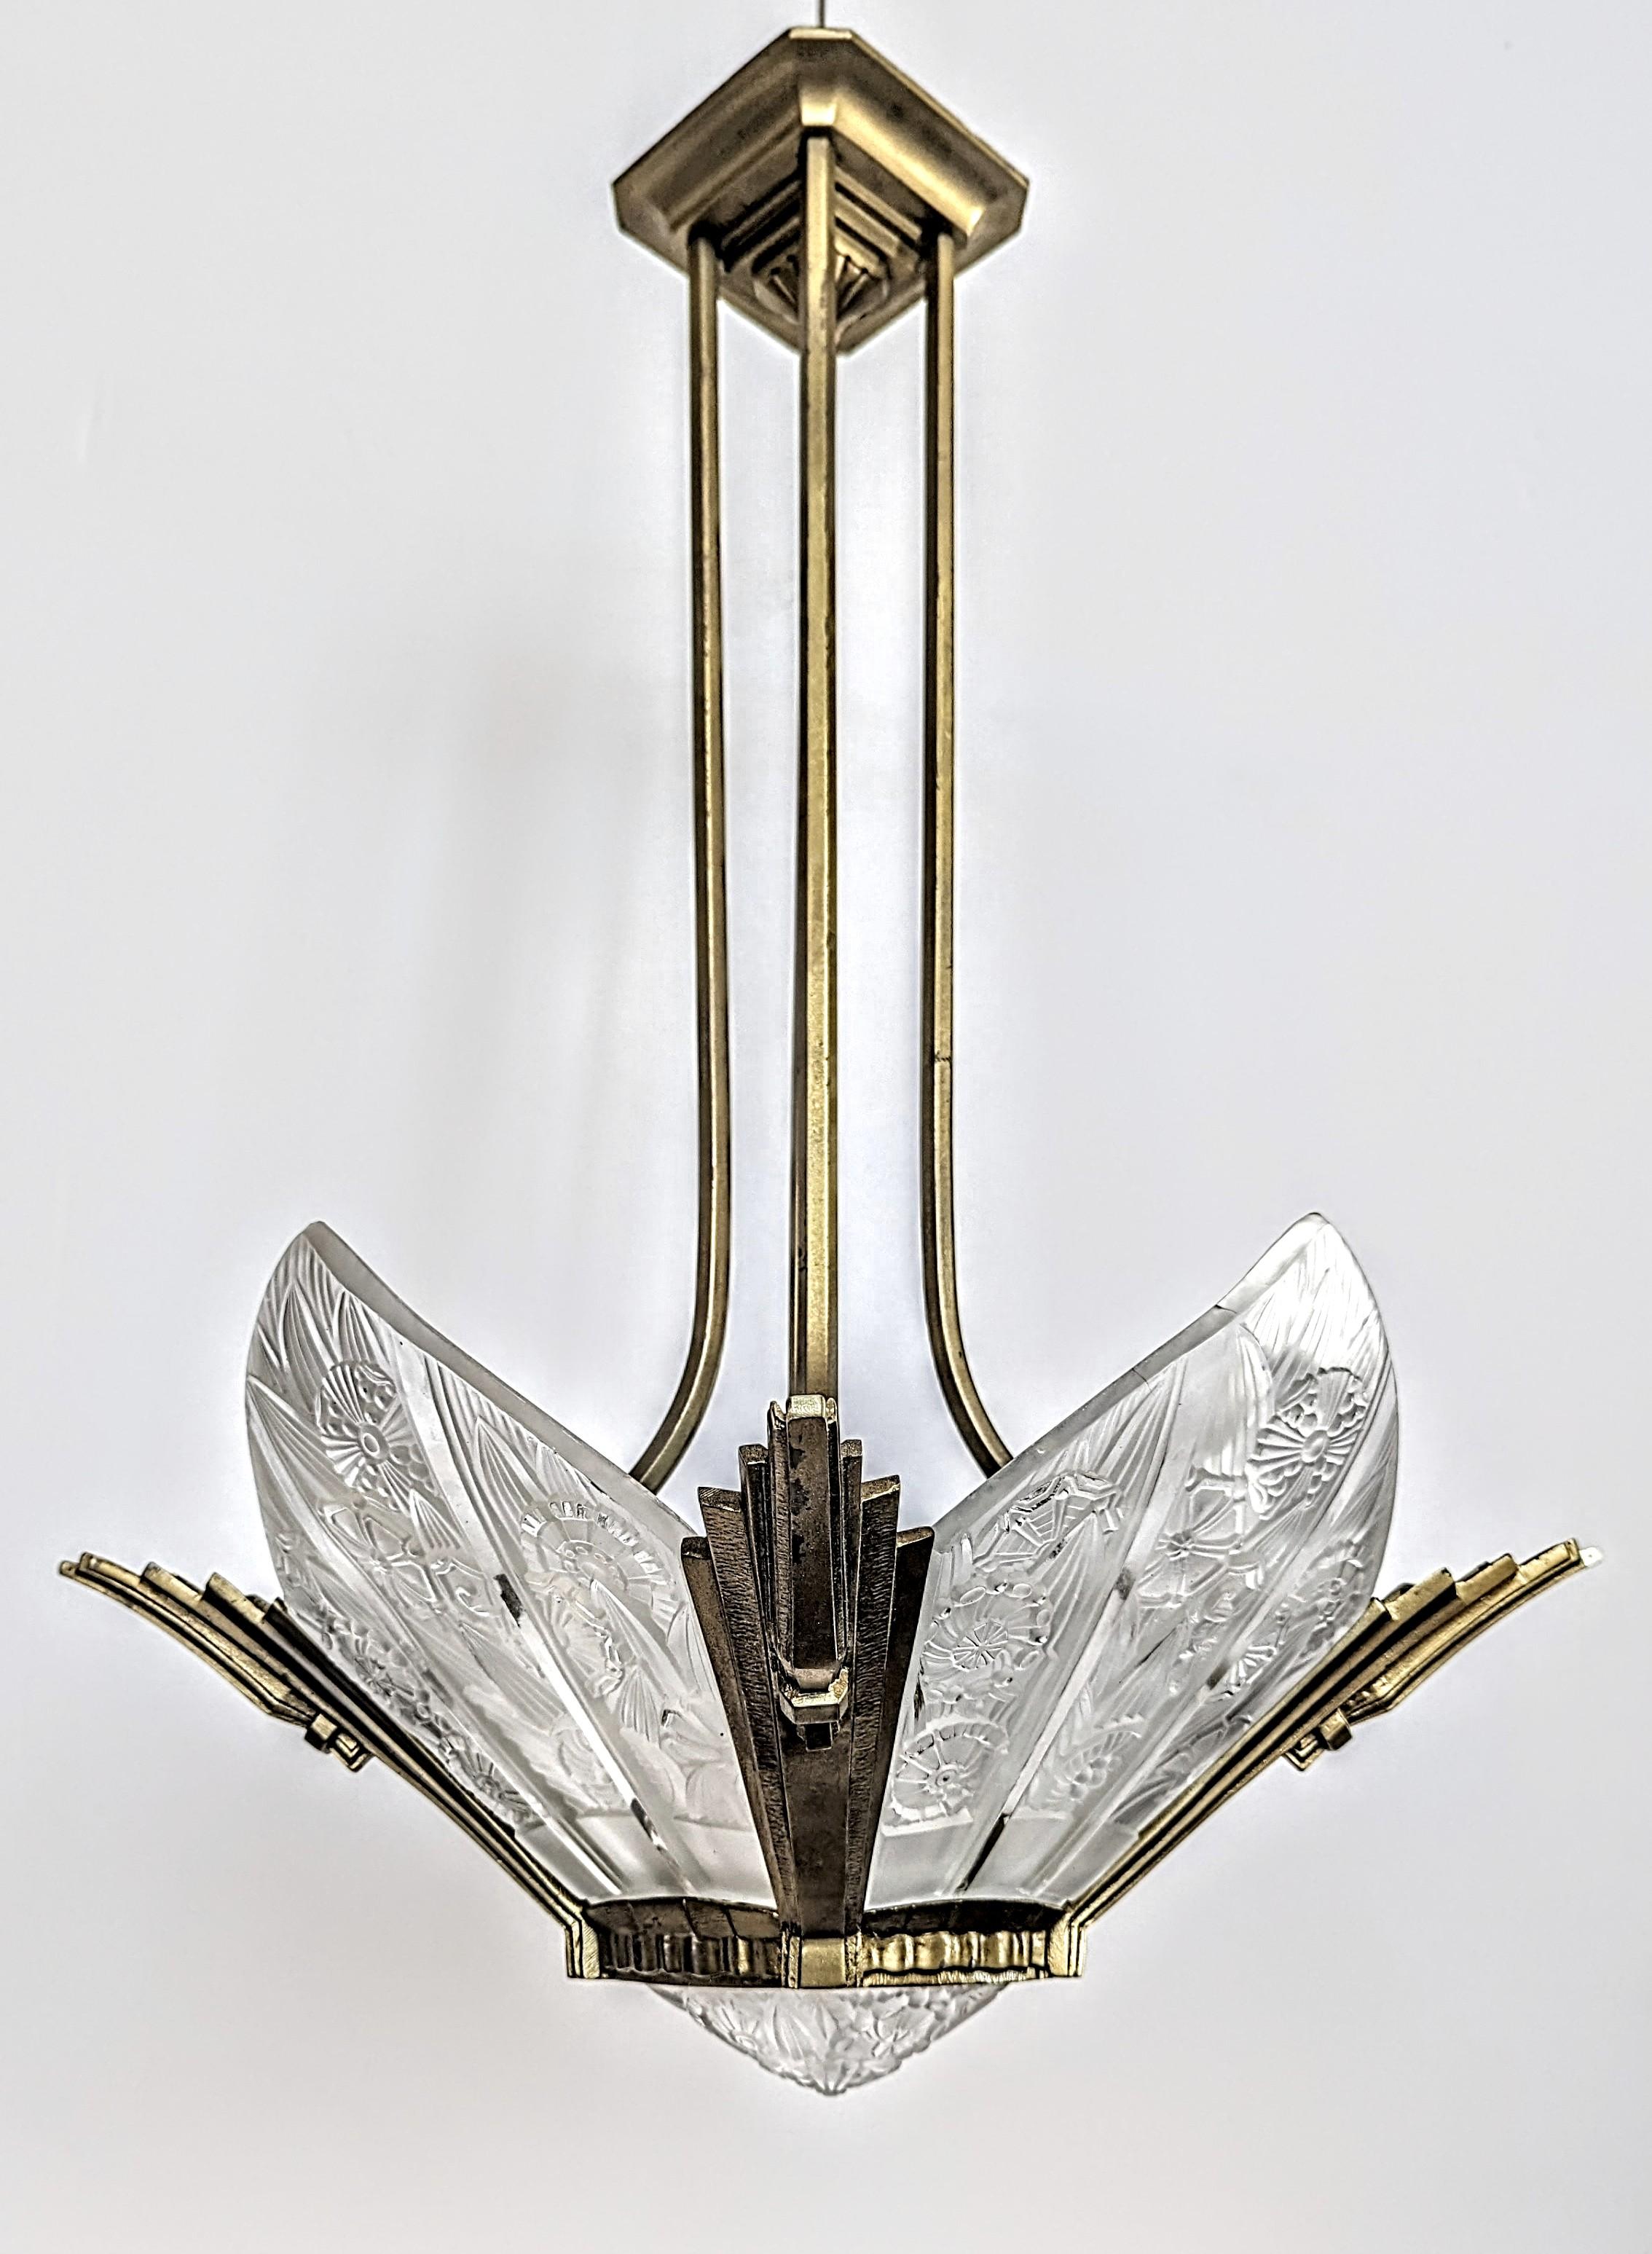 French Art Deco Chandelier Signed by Hettier Vincent In Good Condition For Sale In Long Island City, NY